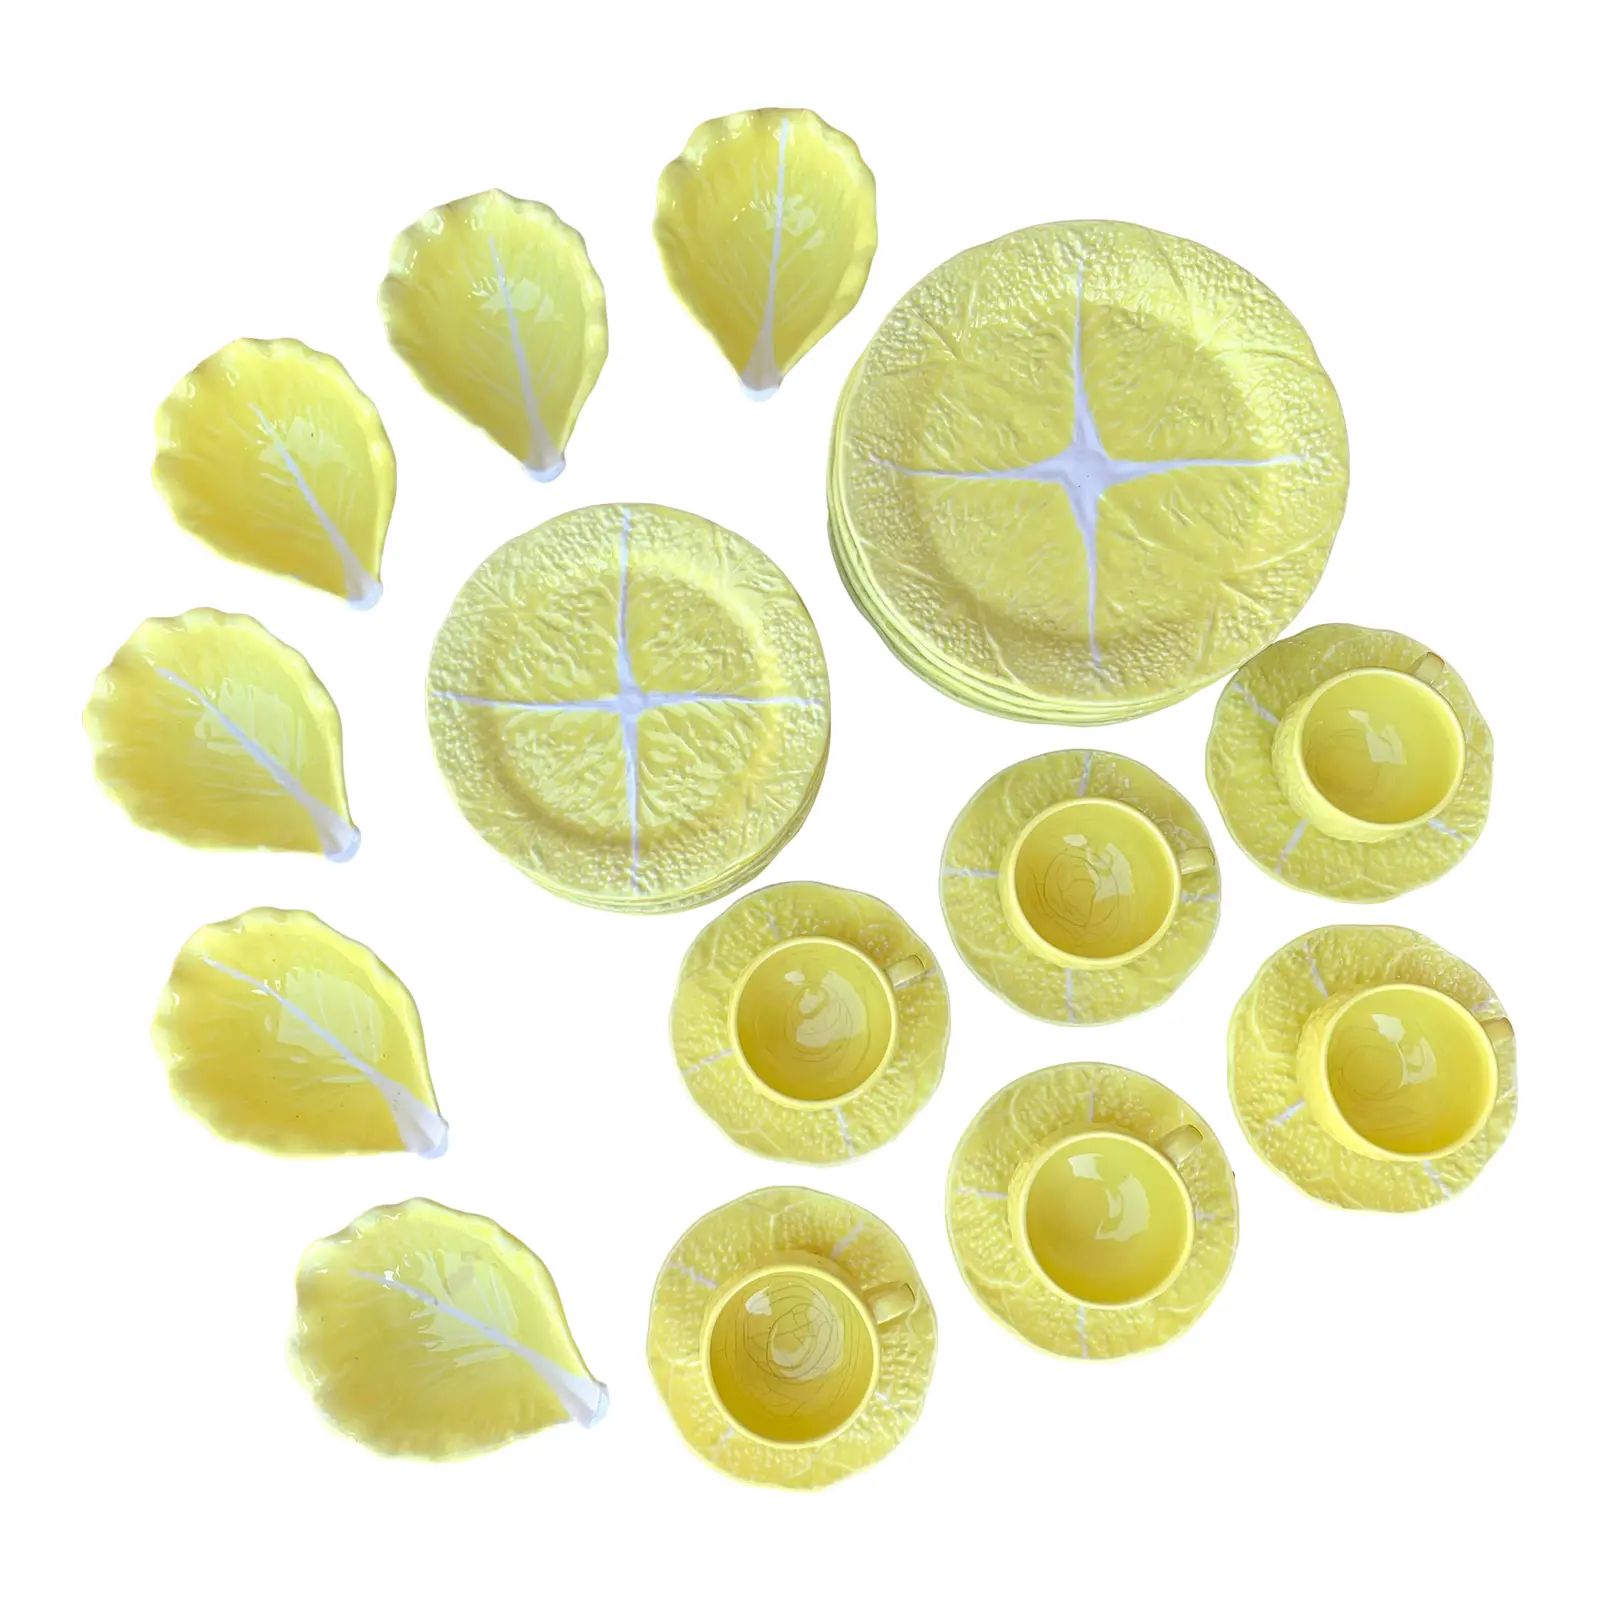 Vintage 1950s Secla Portugal Majolica Yellow Cabbage Plates Complete Service for Six - 30 Pieces | Chairish